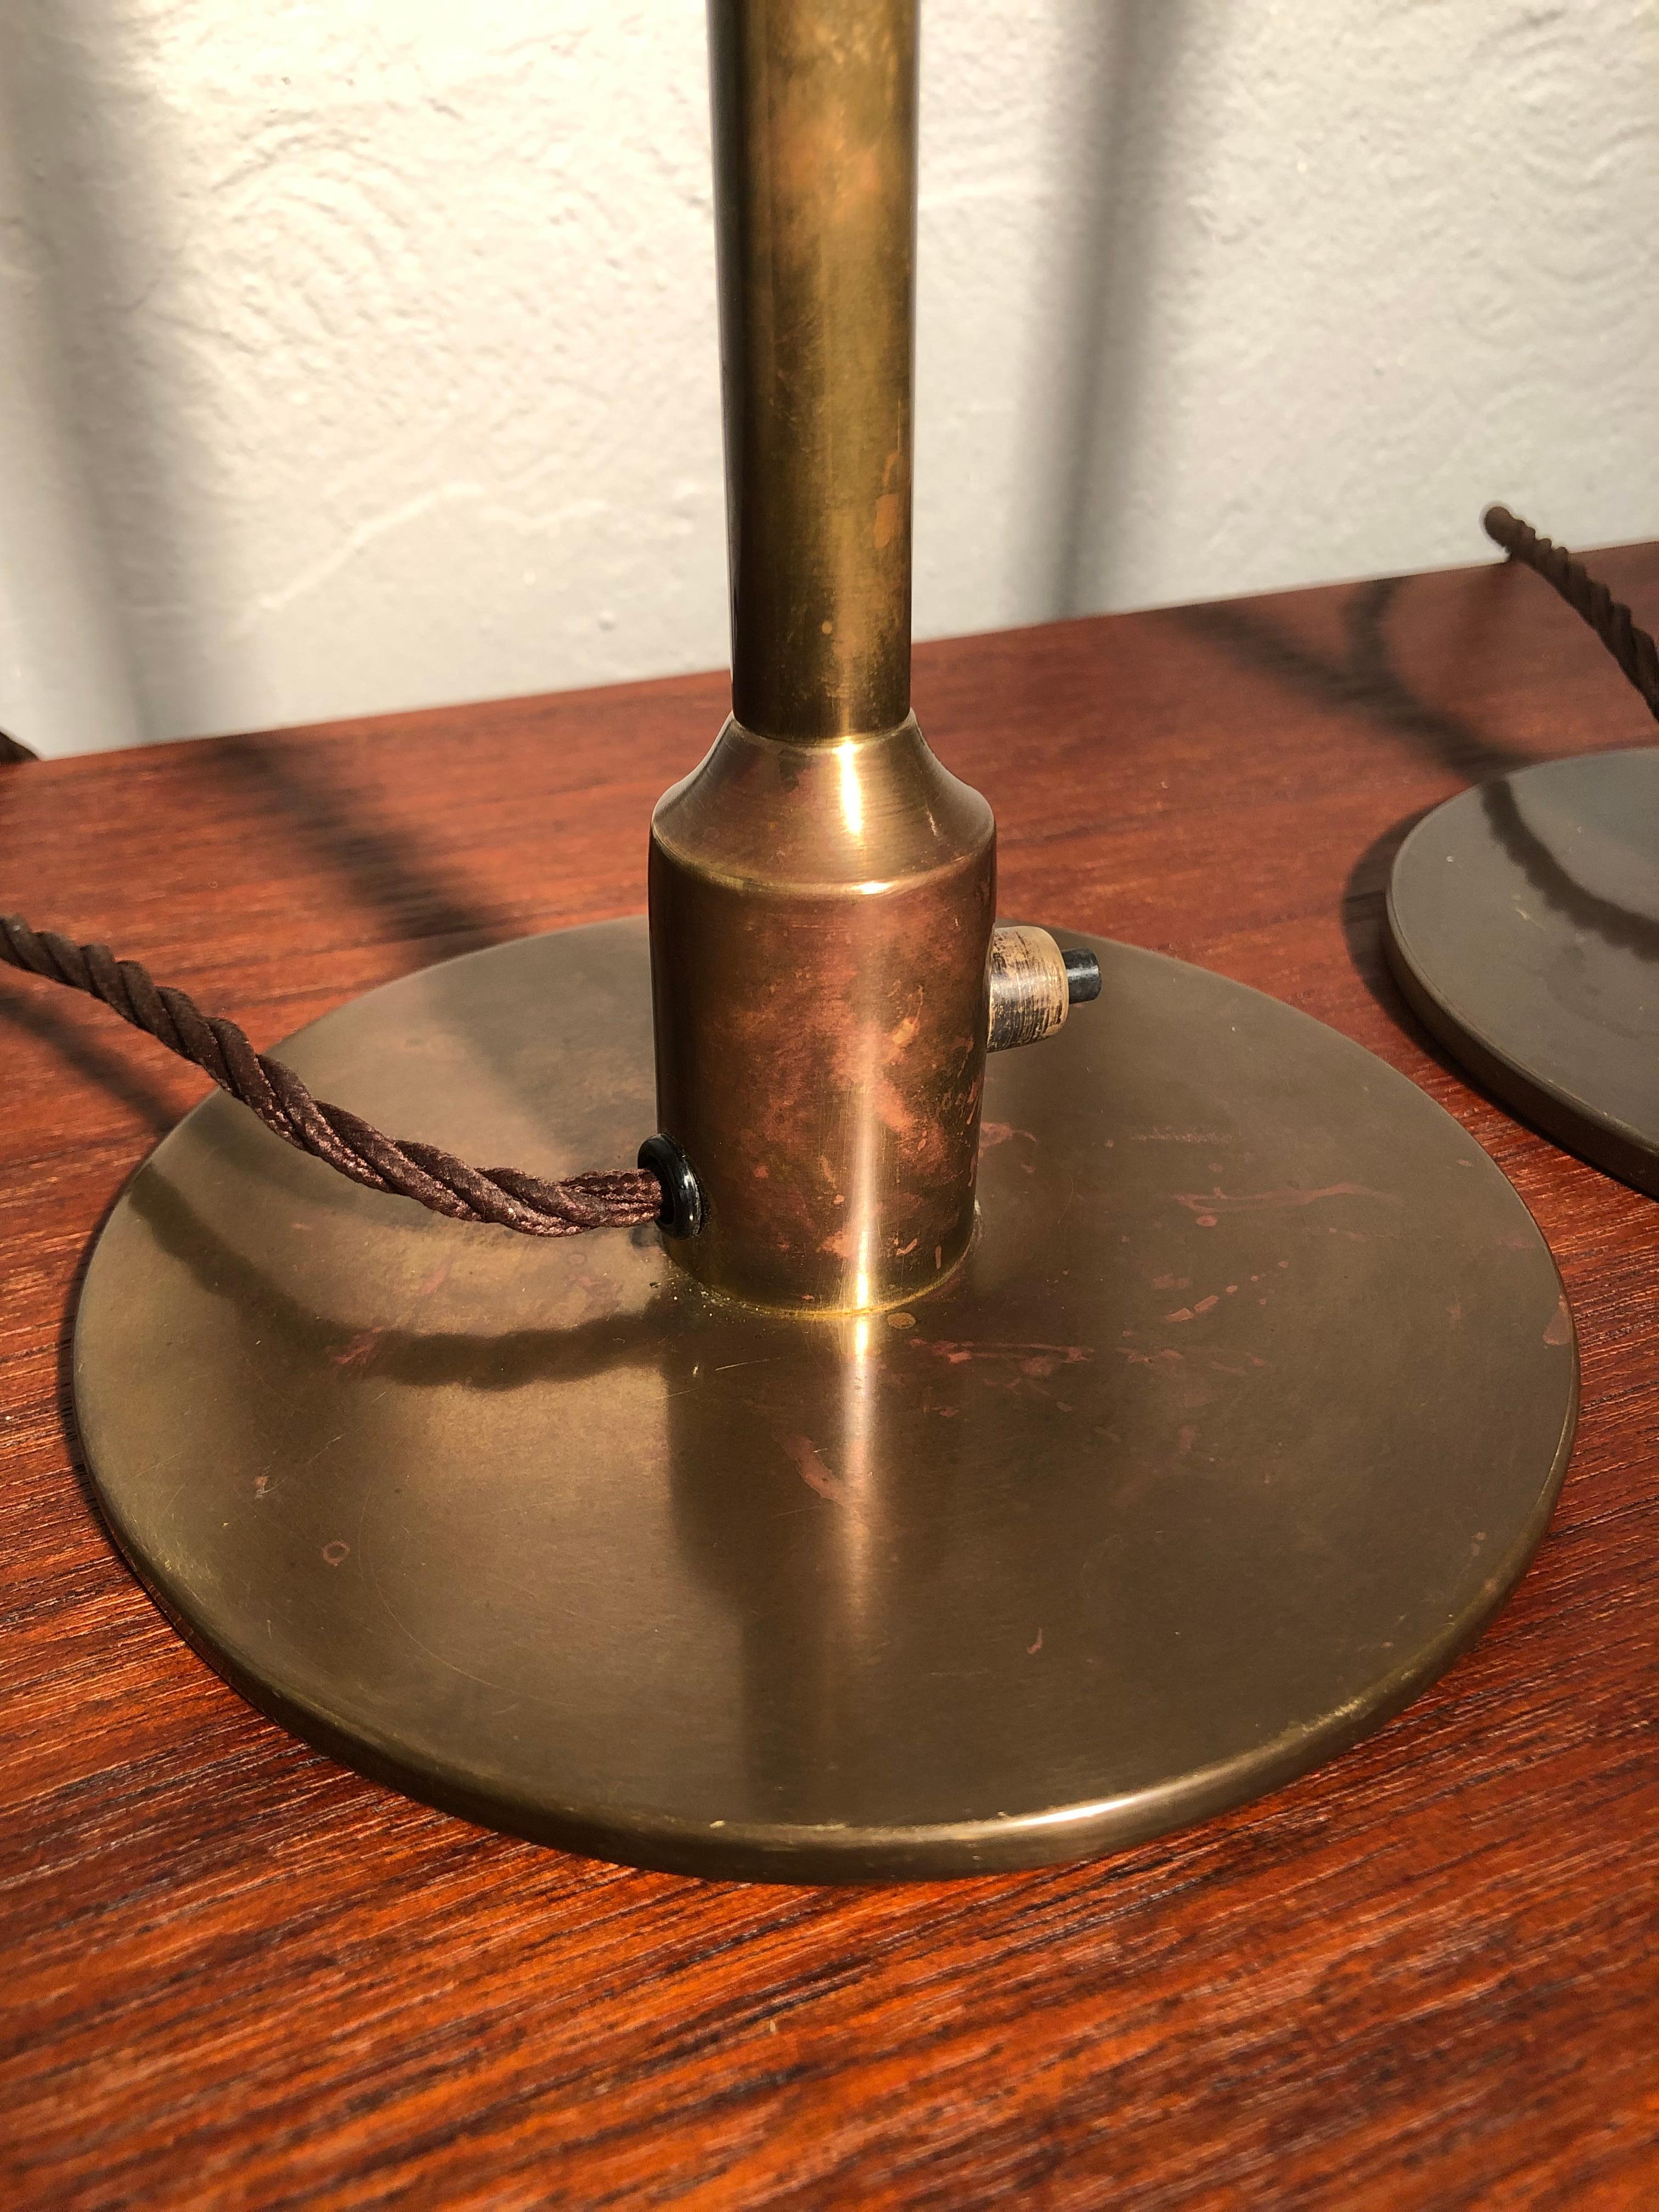 Pair of Vintage Brass Table Lamps by Fog & Mørup Lamp Makers from the 1940s For Sale 10